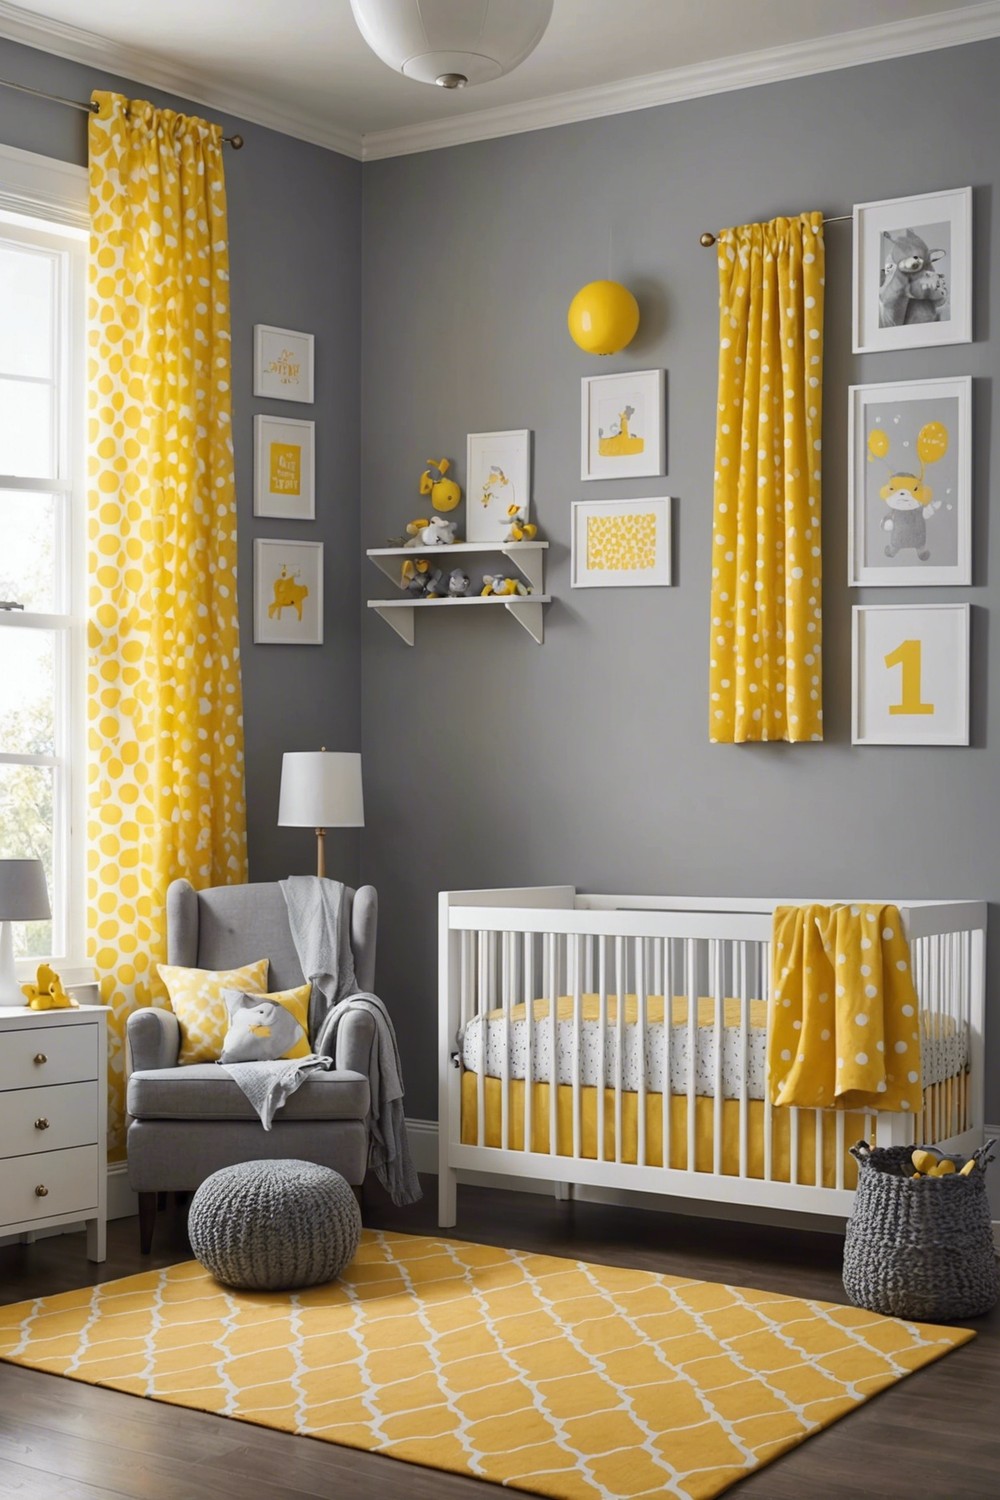 Cheerful Yellow and Grey Color Scheme